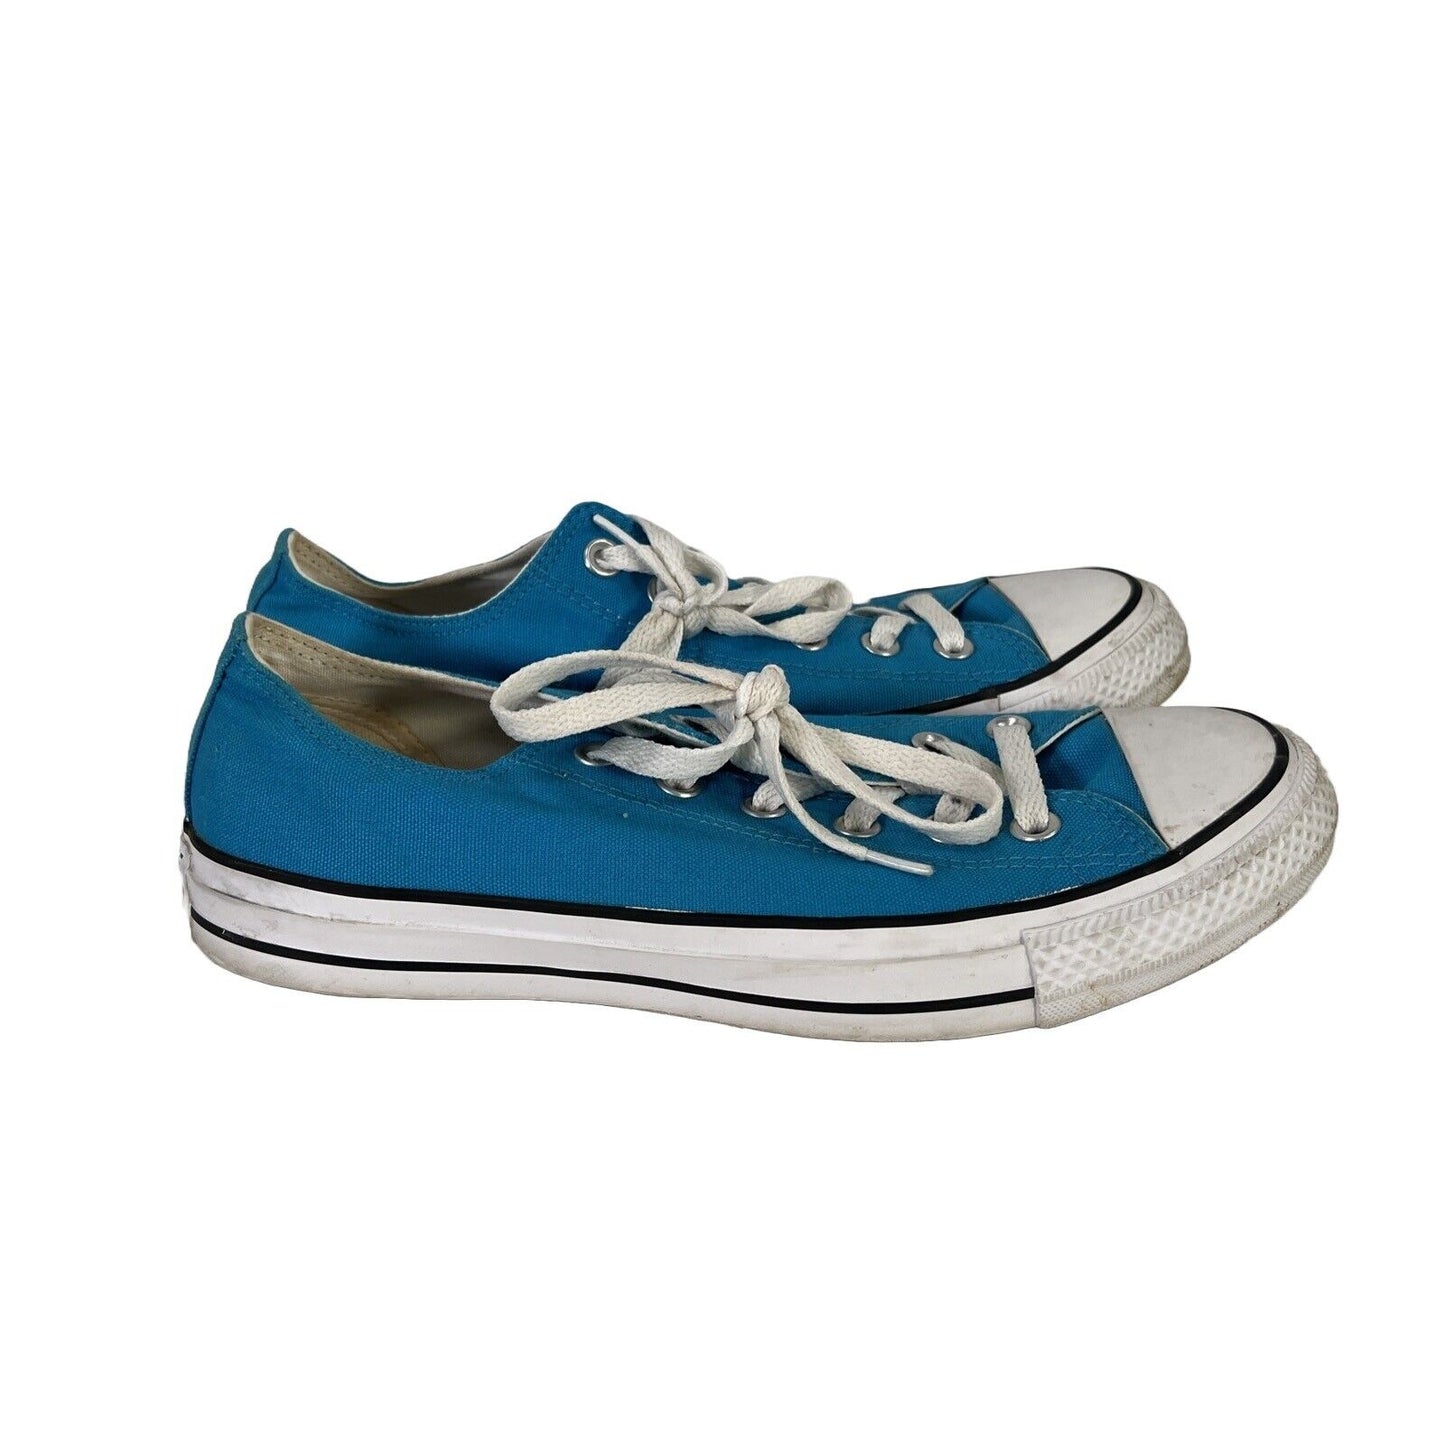 Converse Unisex Blue Lace Up Low Top Casual Sneakers Women's - 9